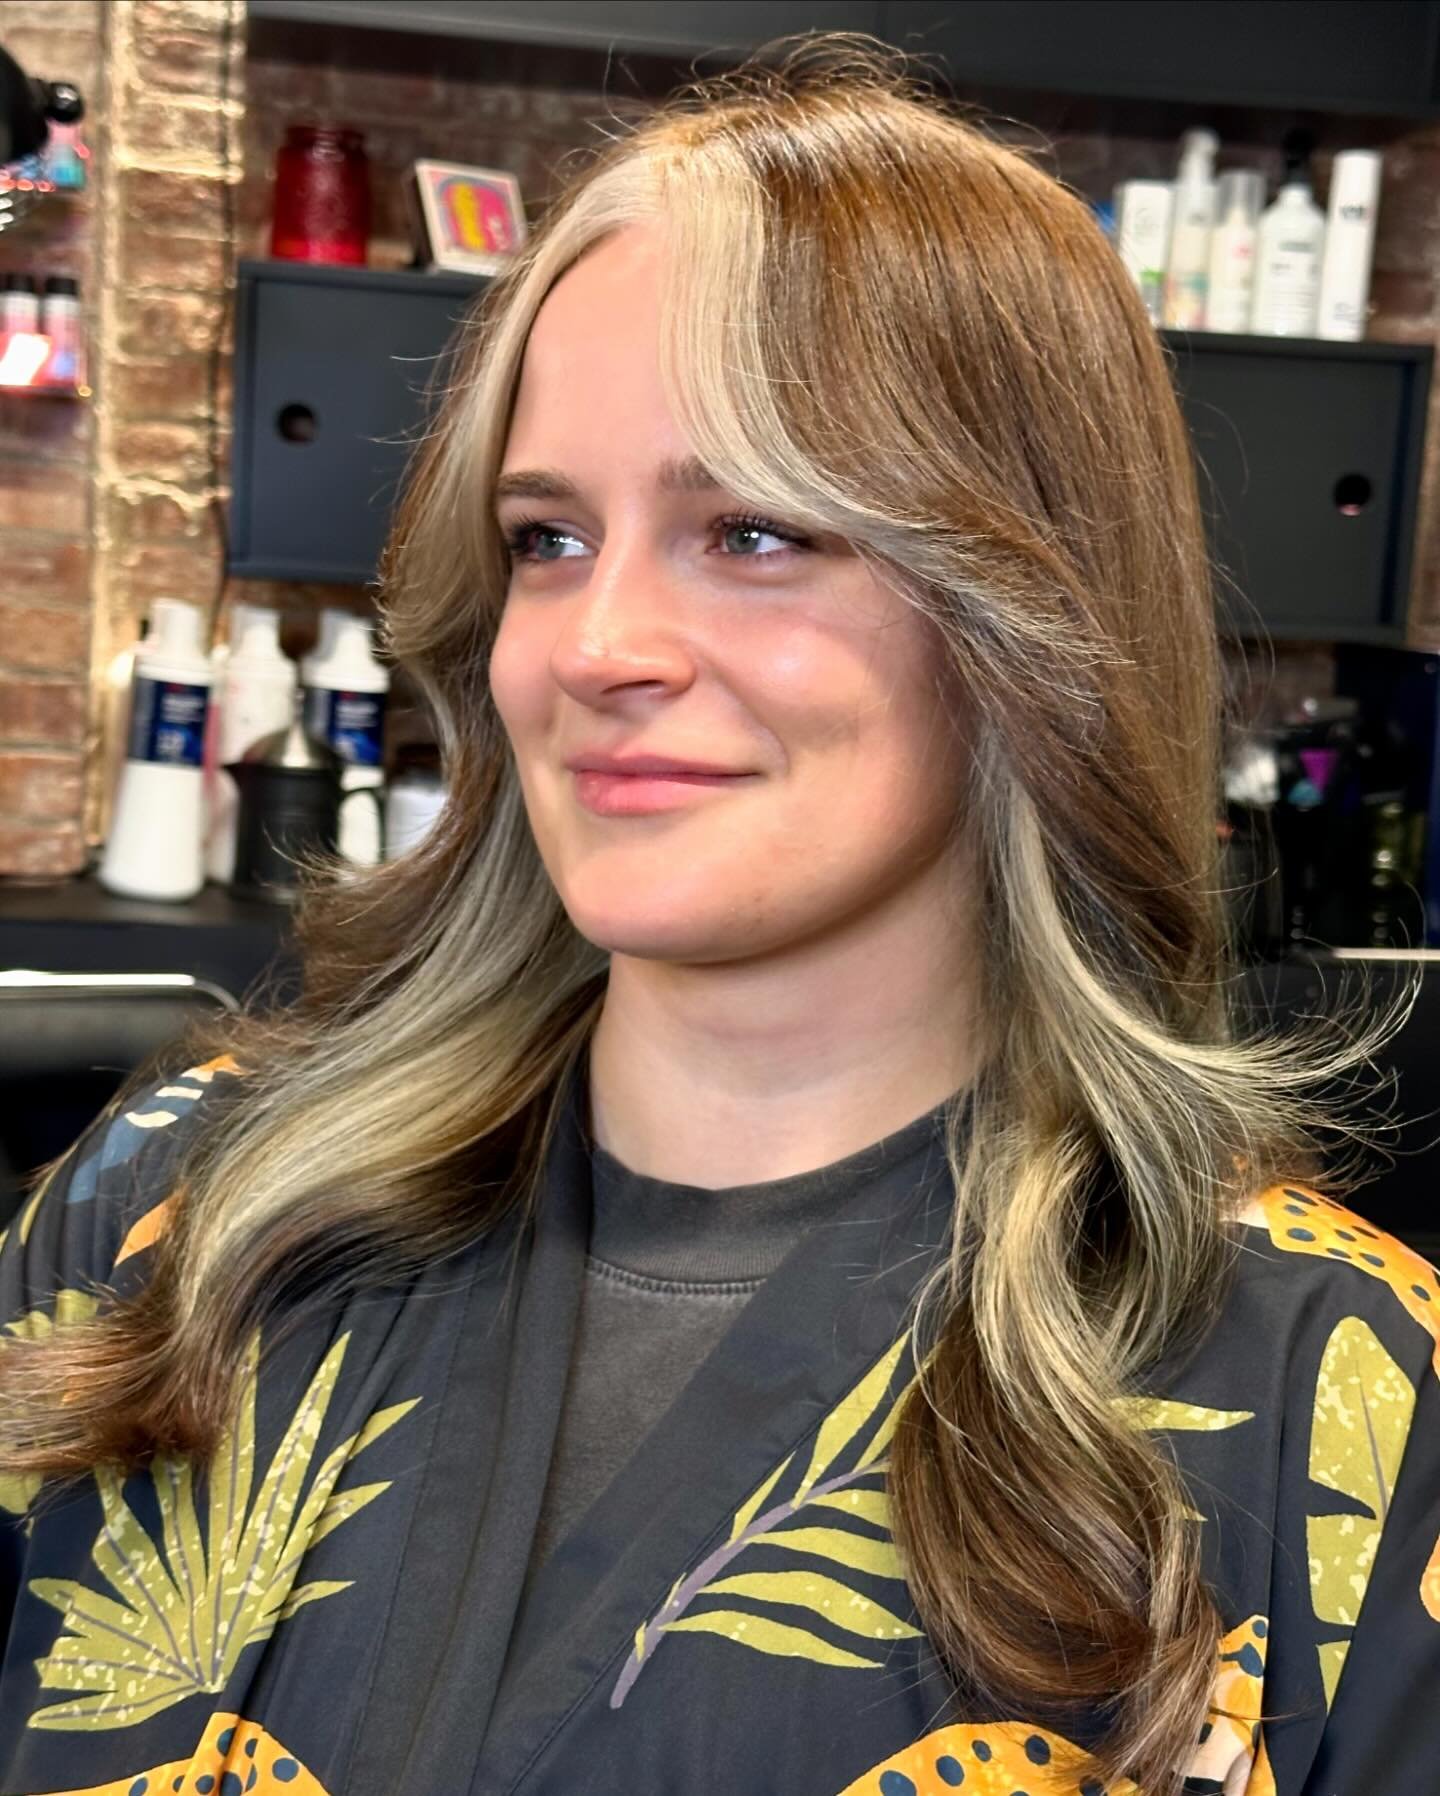 A pop of blonde in time for spring 💥
Cut and color by me💕
@k18hair @innersenseorganicbeauty 

#moneypiece#blondepieces#blondecontrast#trendyhair#hairtrends#curtainbangs

#nychairstylist#nychaircolorist#manhattanhairstylist#manhattanhaircolorist#bro